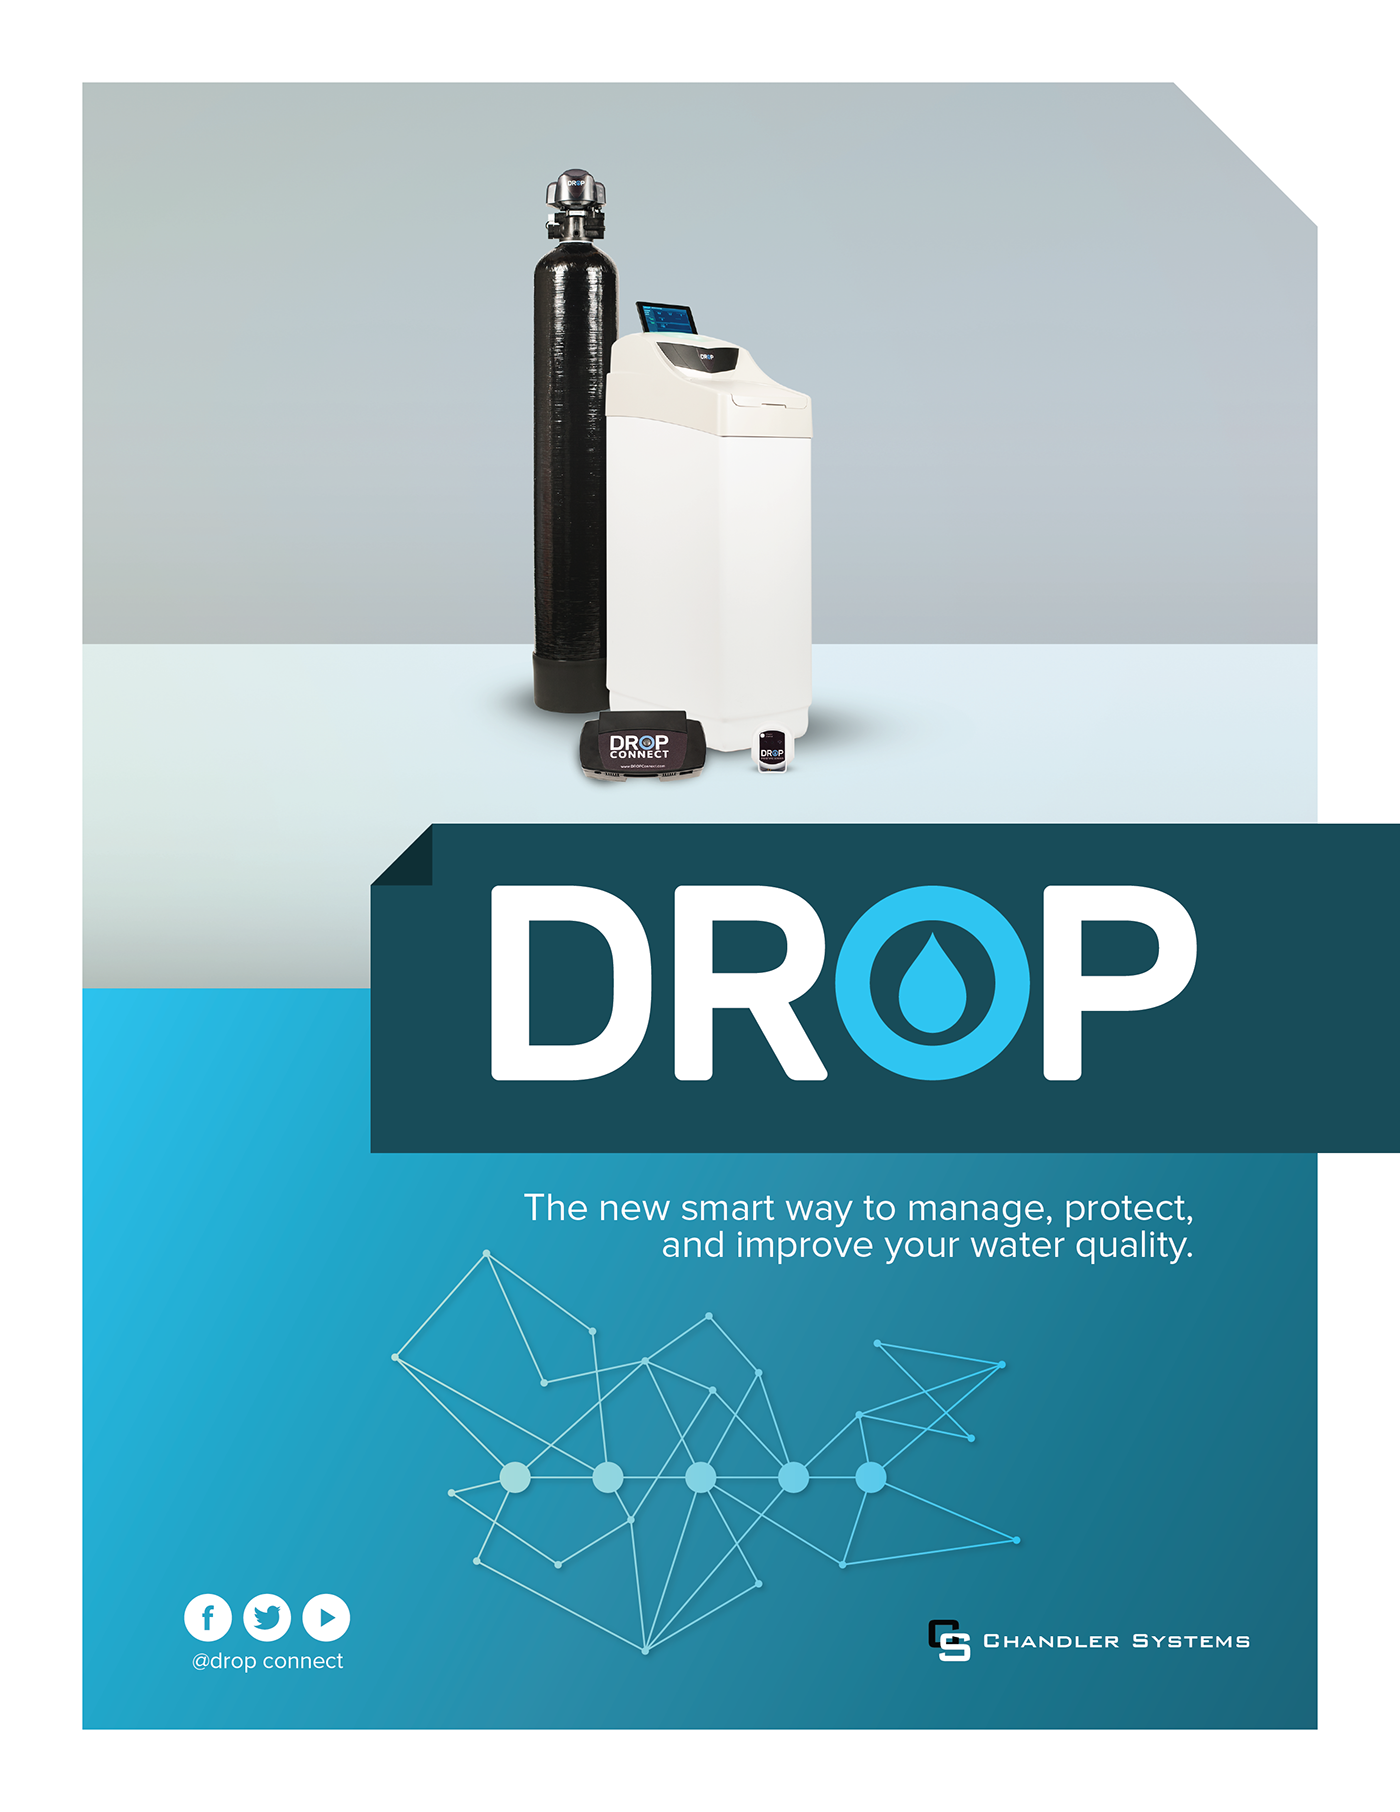 Drop connect. Smart Water Management. Connection dropped